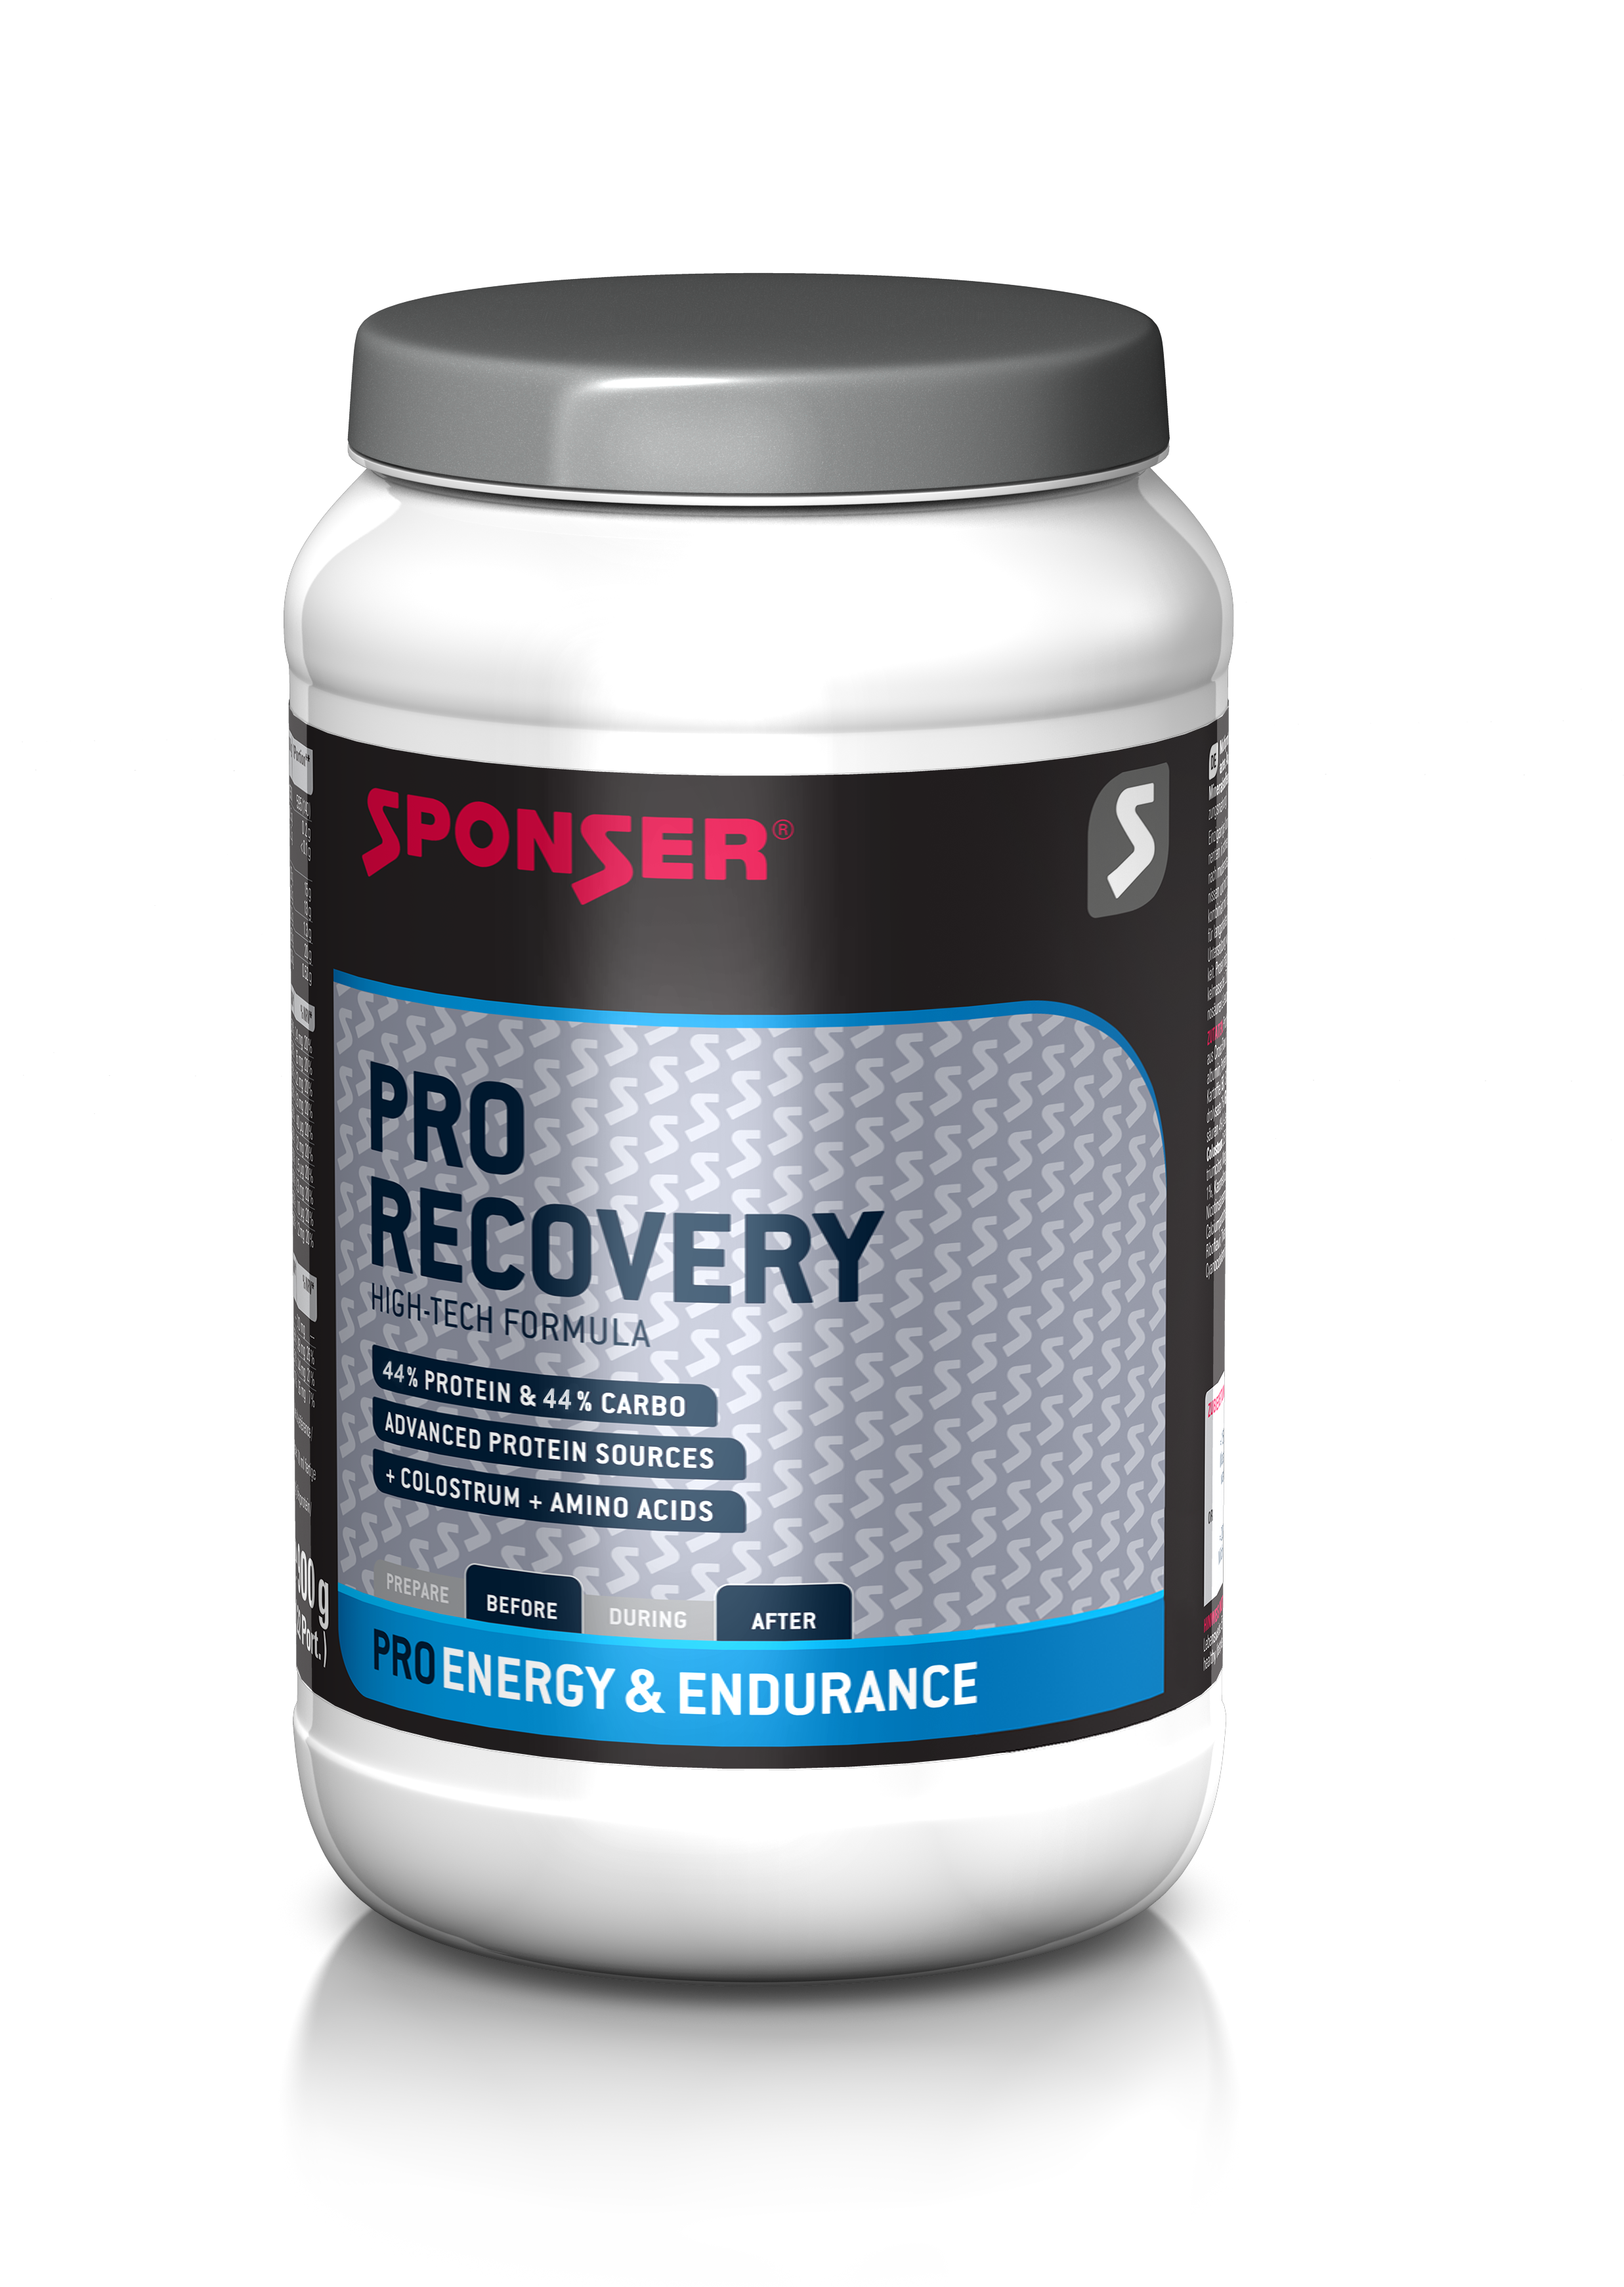 Sponser Power 44/44 Pro Recovery Chocolate  800 g.